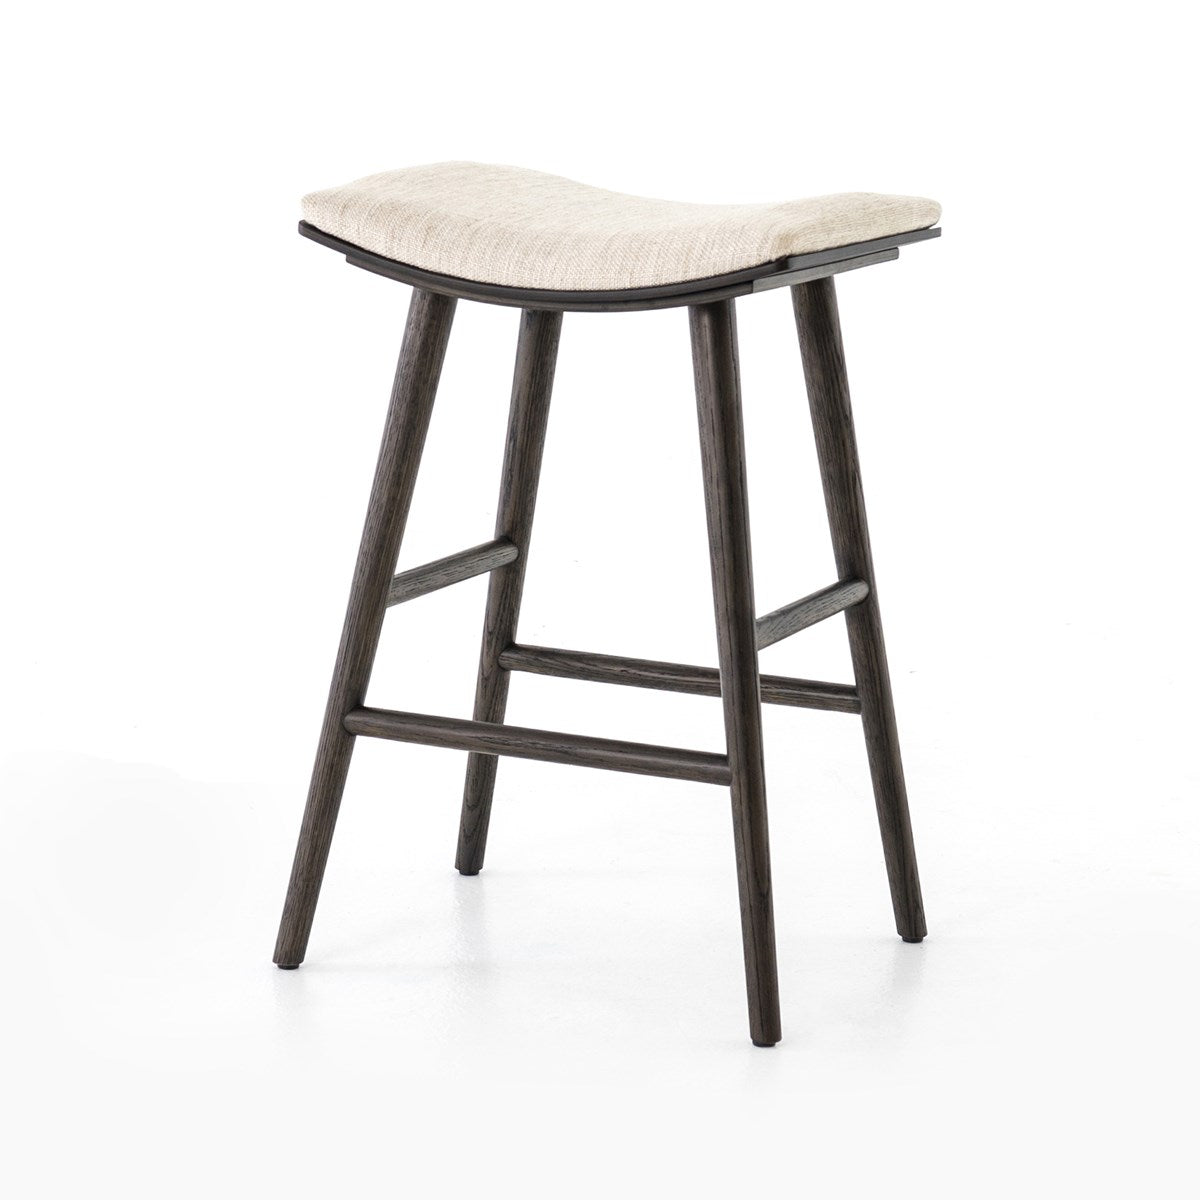 Load image into Gallery viewer, Union Bar + Counter Stool Light Carbon / Counter StoolStool Four Hands  Light Carbon Counter Stool  Four Hands, Burke Decor, Mid Century Modern Furniture, Old Bones Furniture Company, Old Bones Co, Modern Mid Century, Designer Furniture, https://www.oldbonesco.com/
